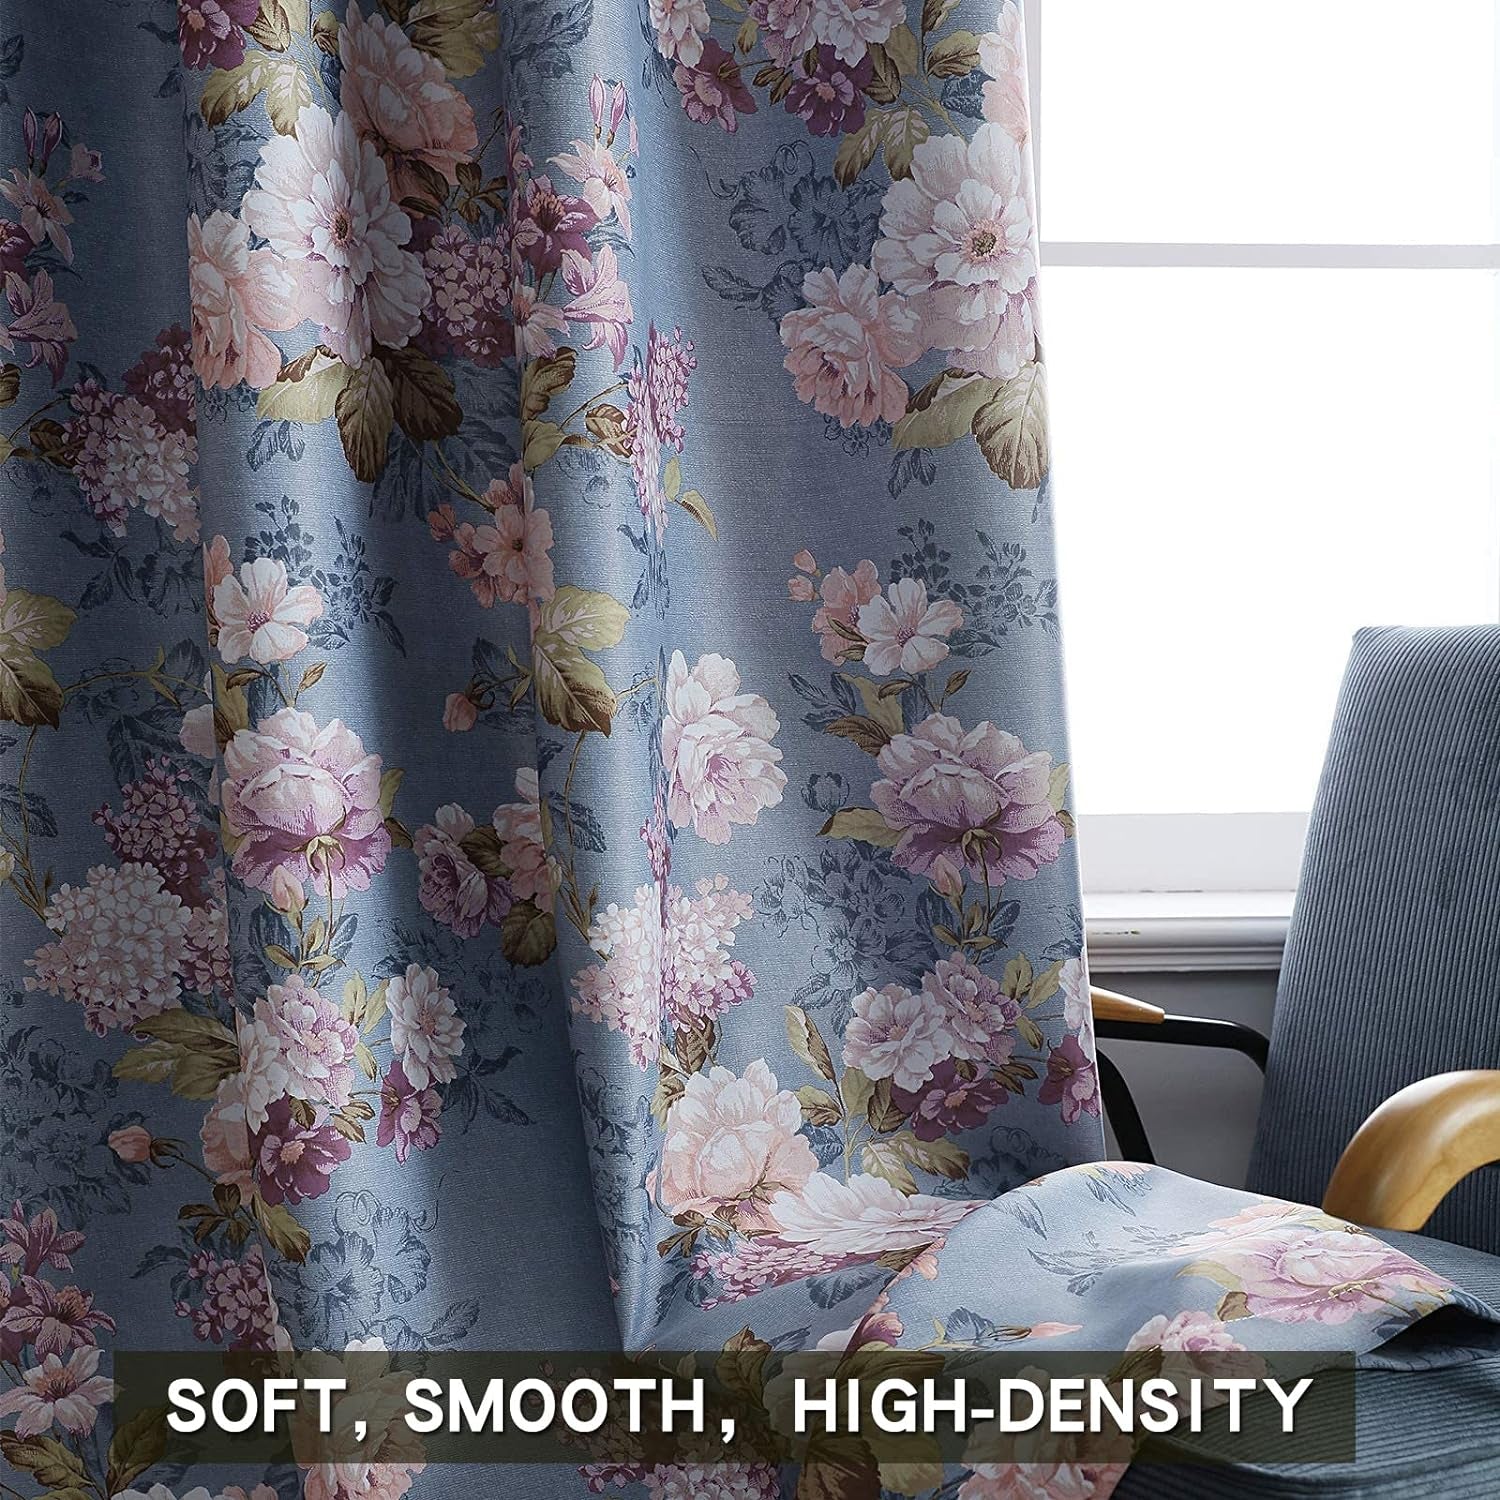 SUOUO Double Sided Floral Blackout Curtains for Bedroom Patterned Vintage Flower Thermal Insulated Window Drapes Room Darkening for Living Room 2 Panels 84 Inches Long Blue  SUOUO   